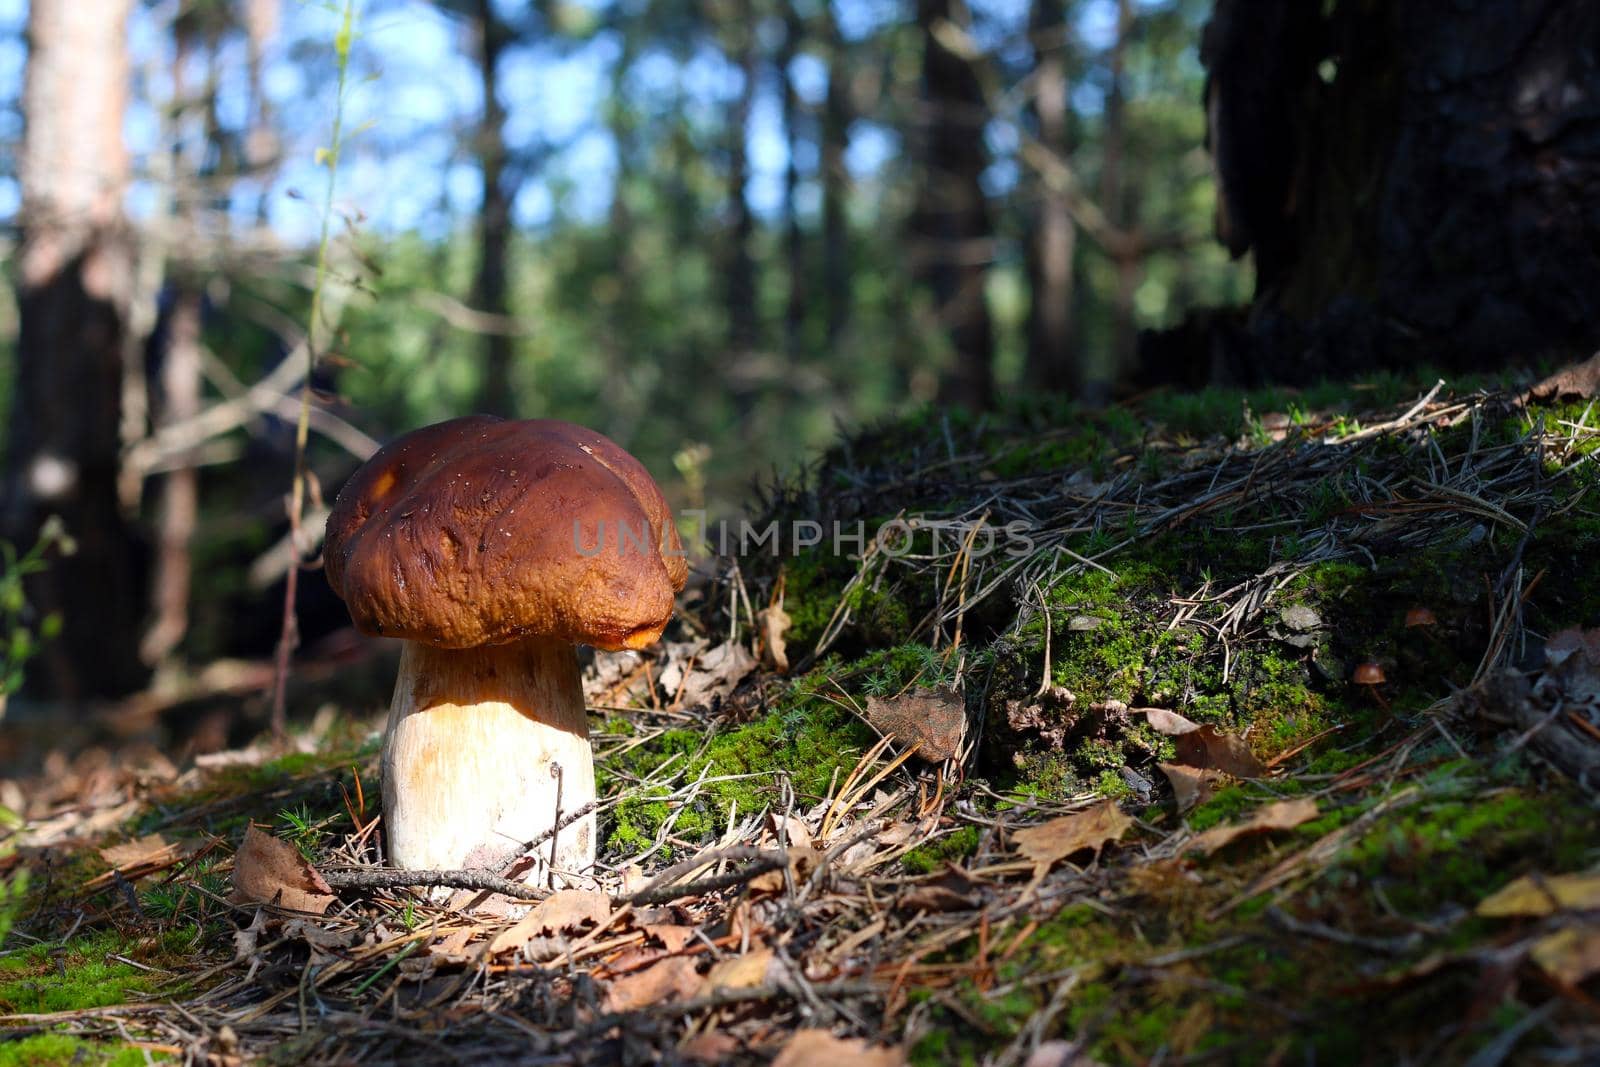 Cep mushroom grow in moss and coniferous forest. Royal porcini food in nature. Boletus growing in wild wood